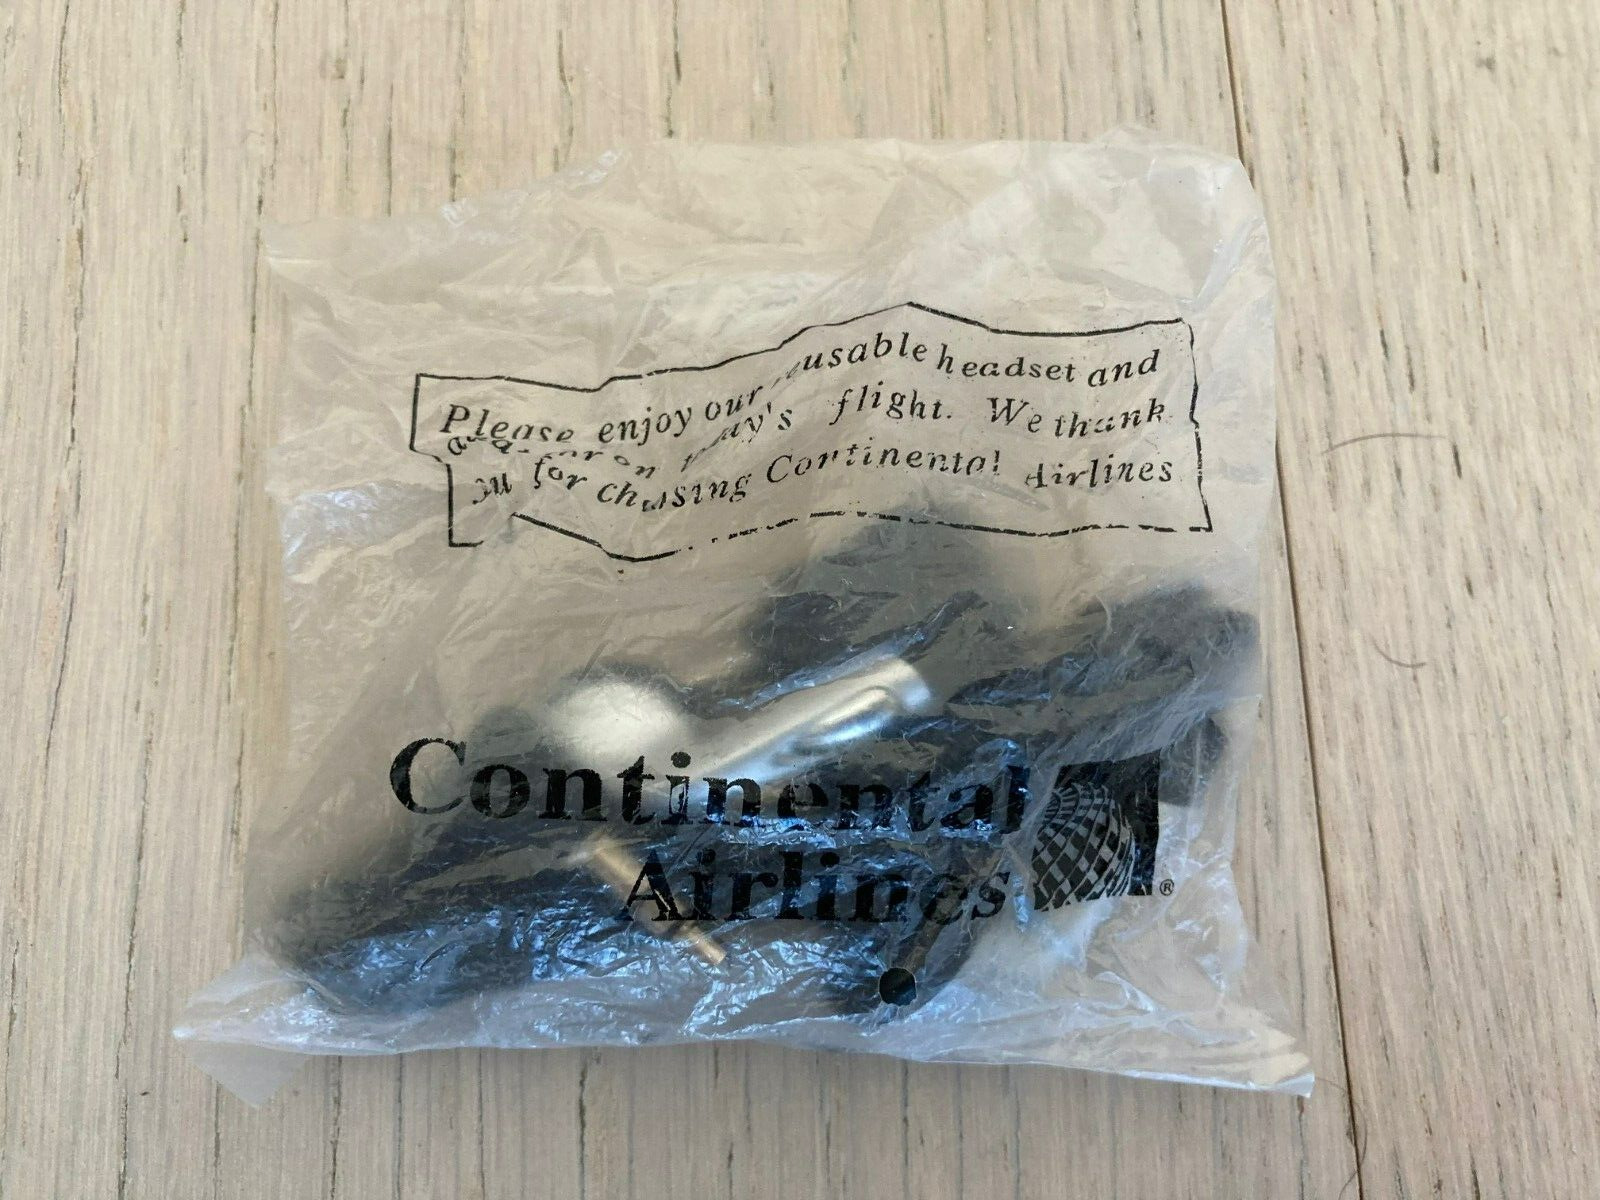 NEW Continental Airlines Earphones Original Bag Never Opened 3.5mm w/ Adapter